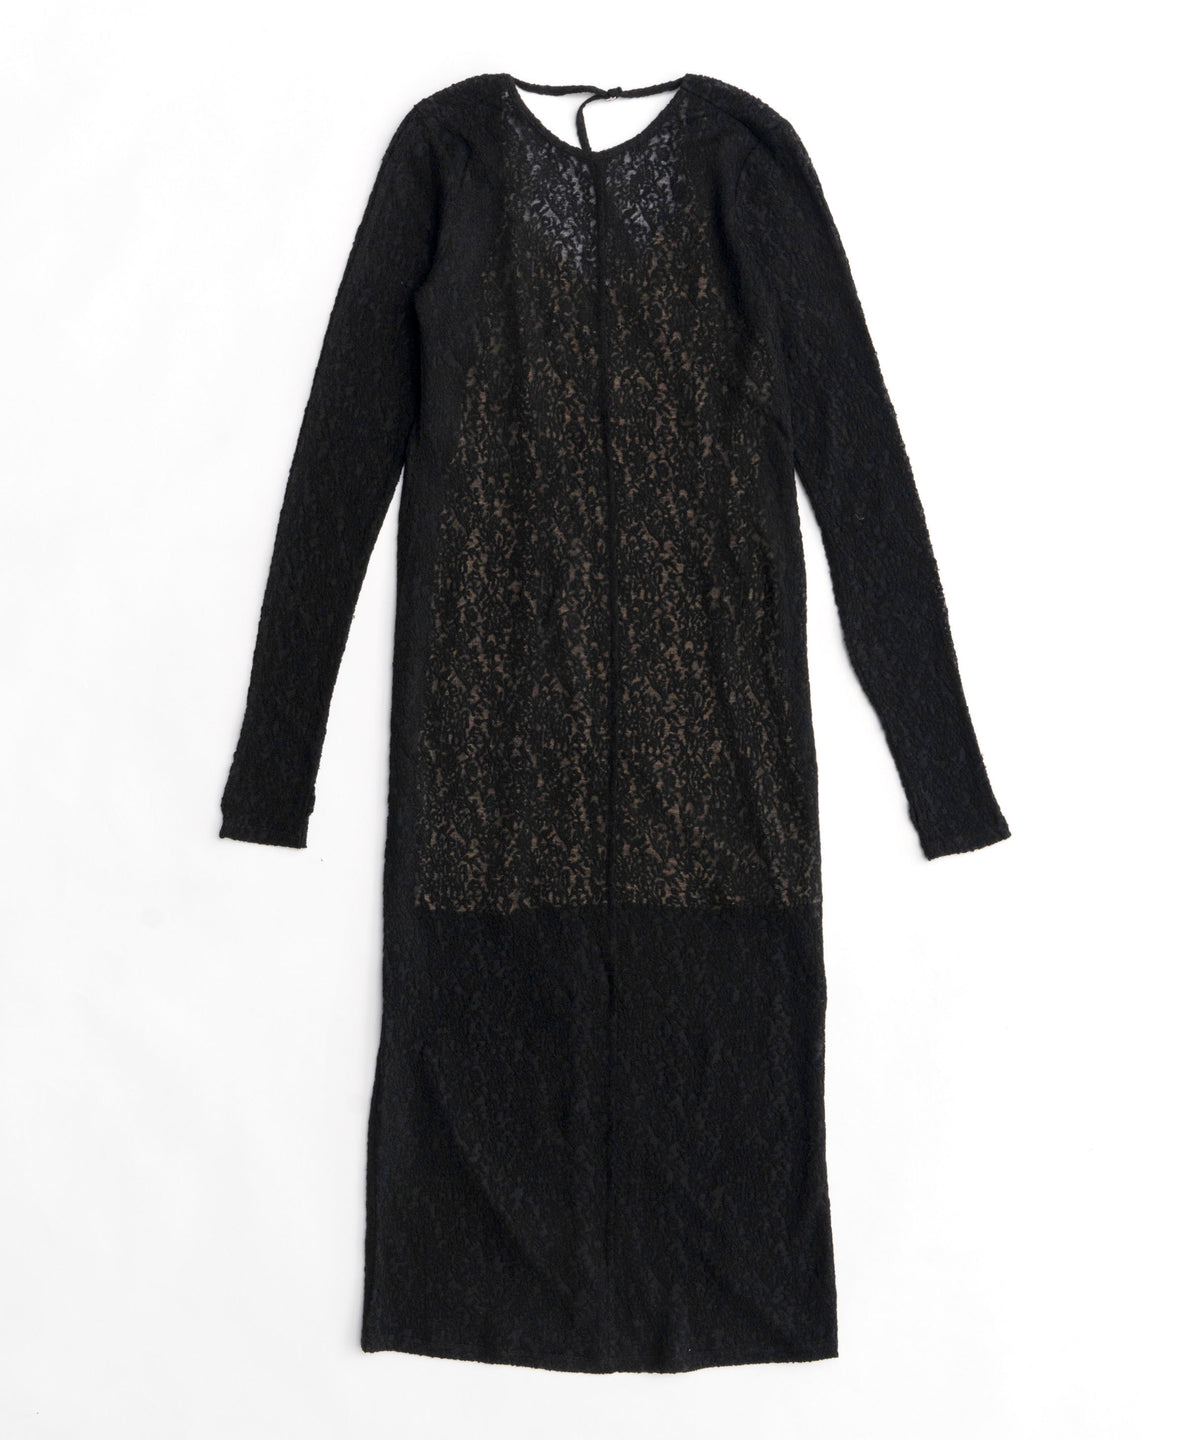 【24SPRING PRE-ORDER】Maxi Length Lace One-piece Dress